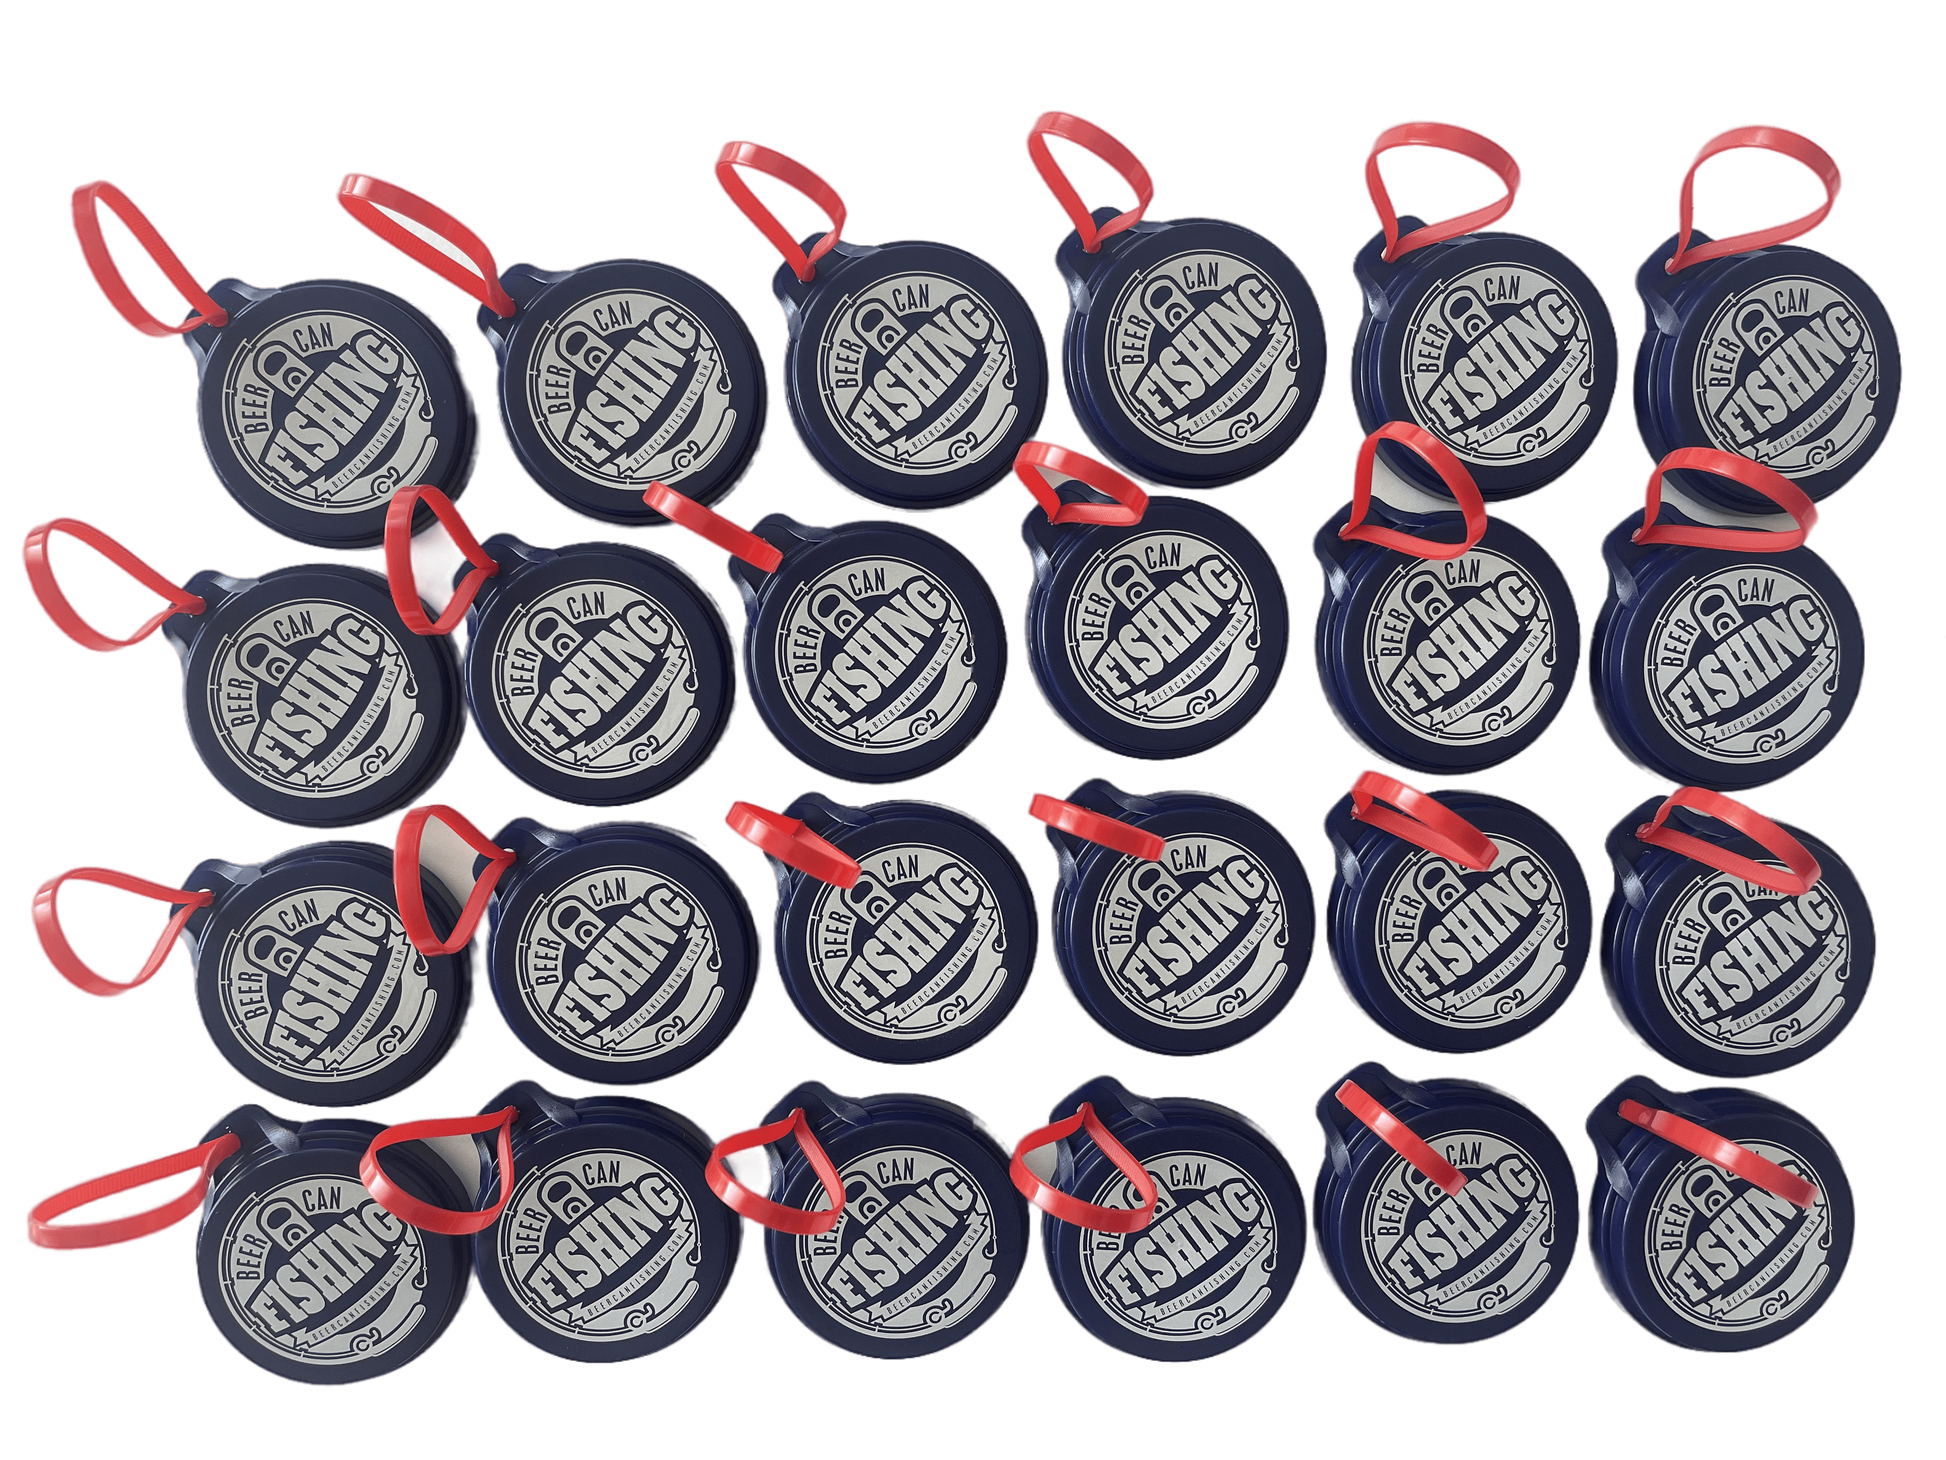 24 pack of beer can fishing game lids